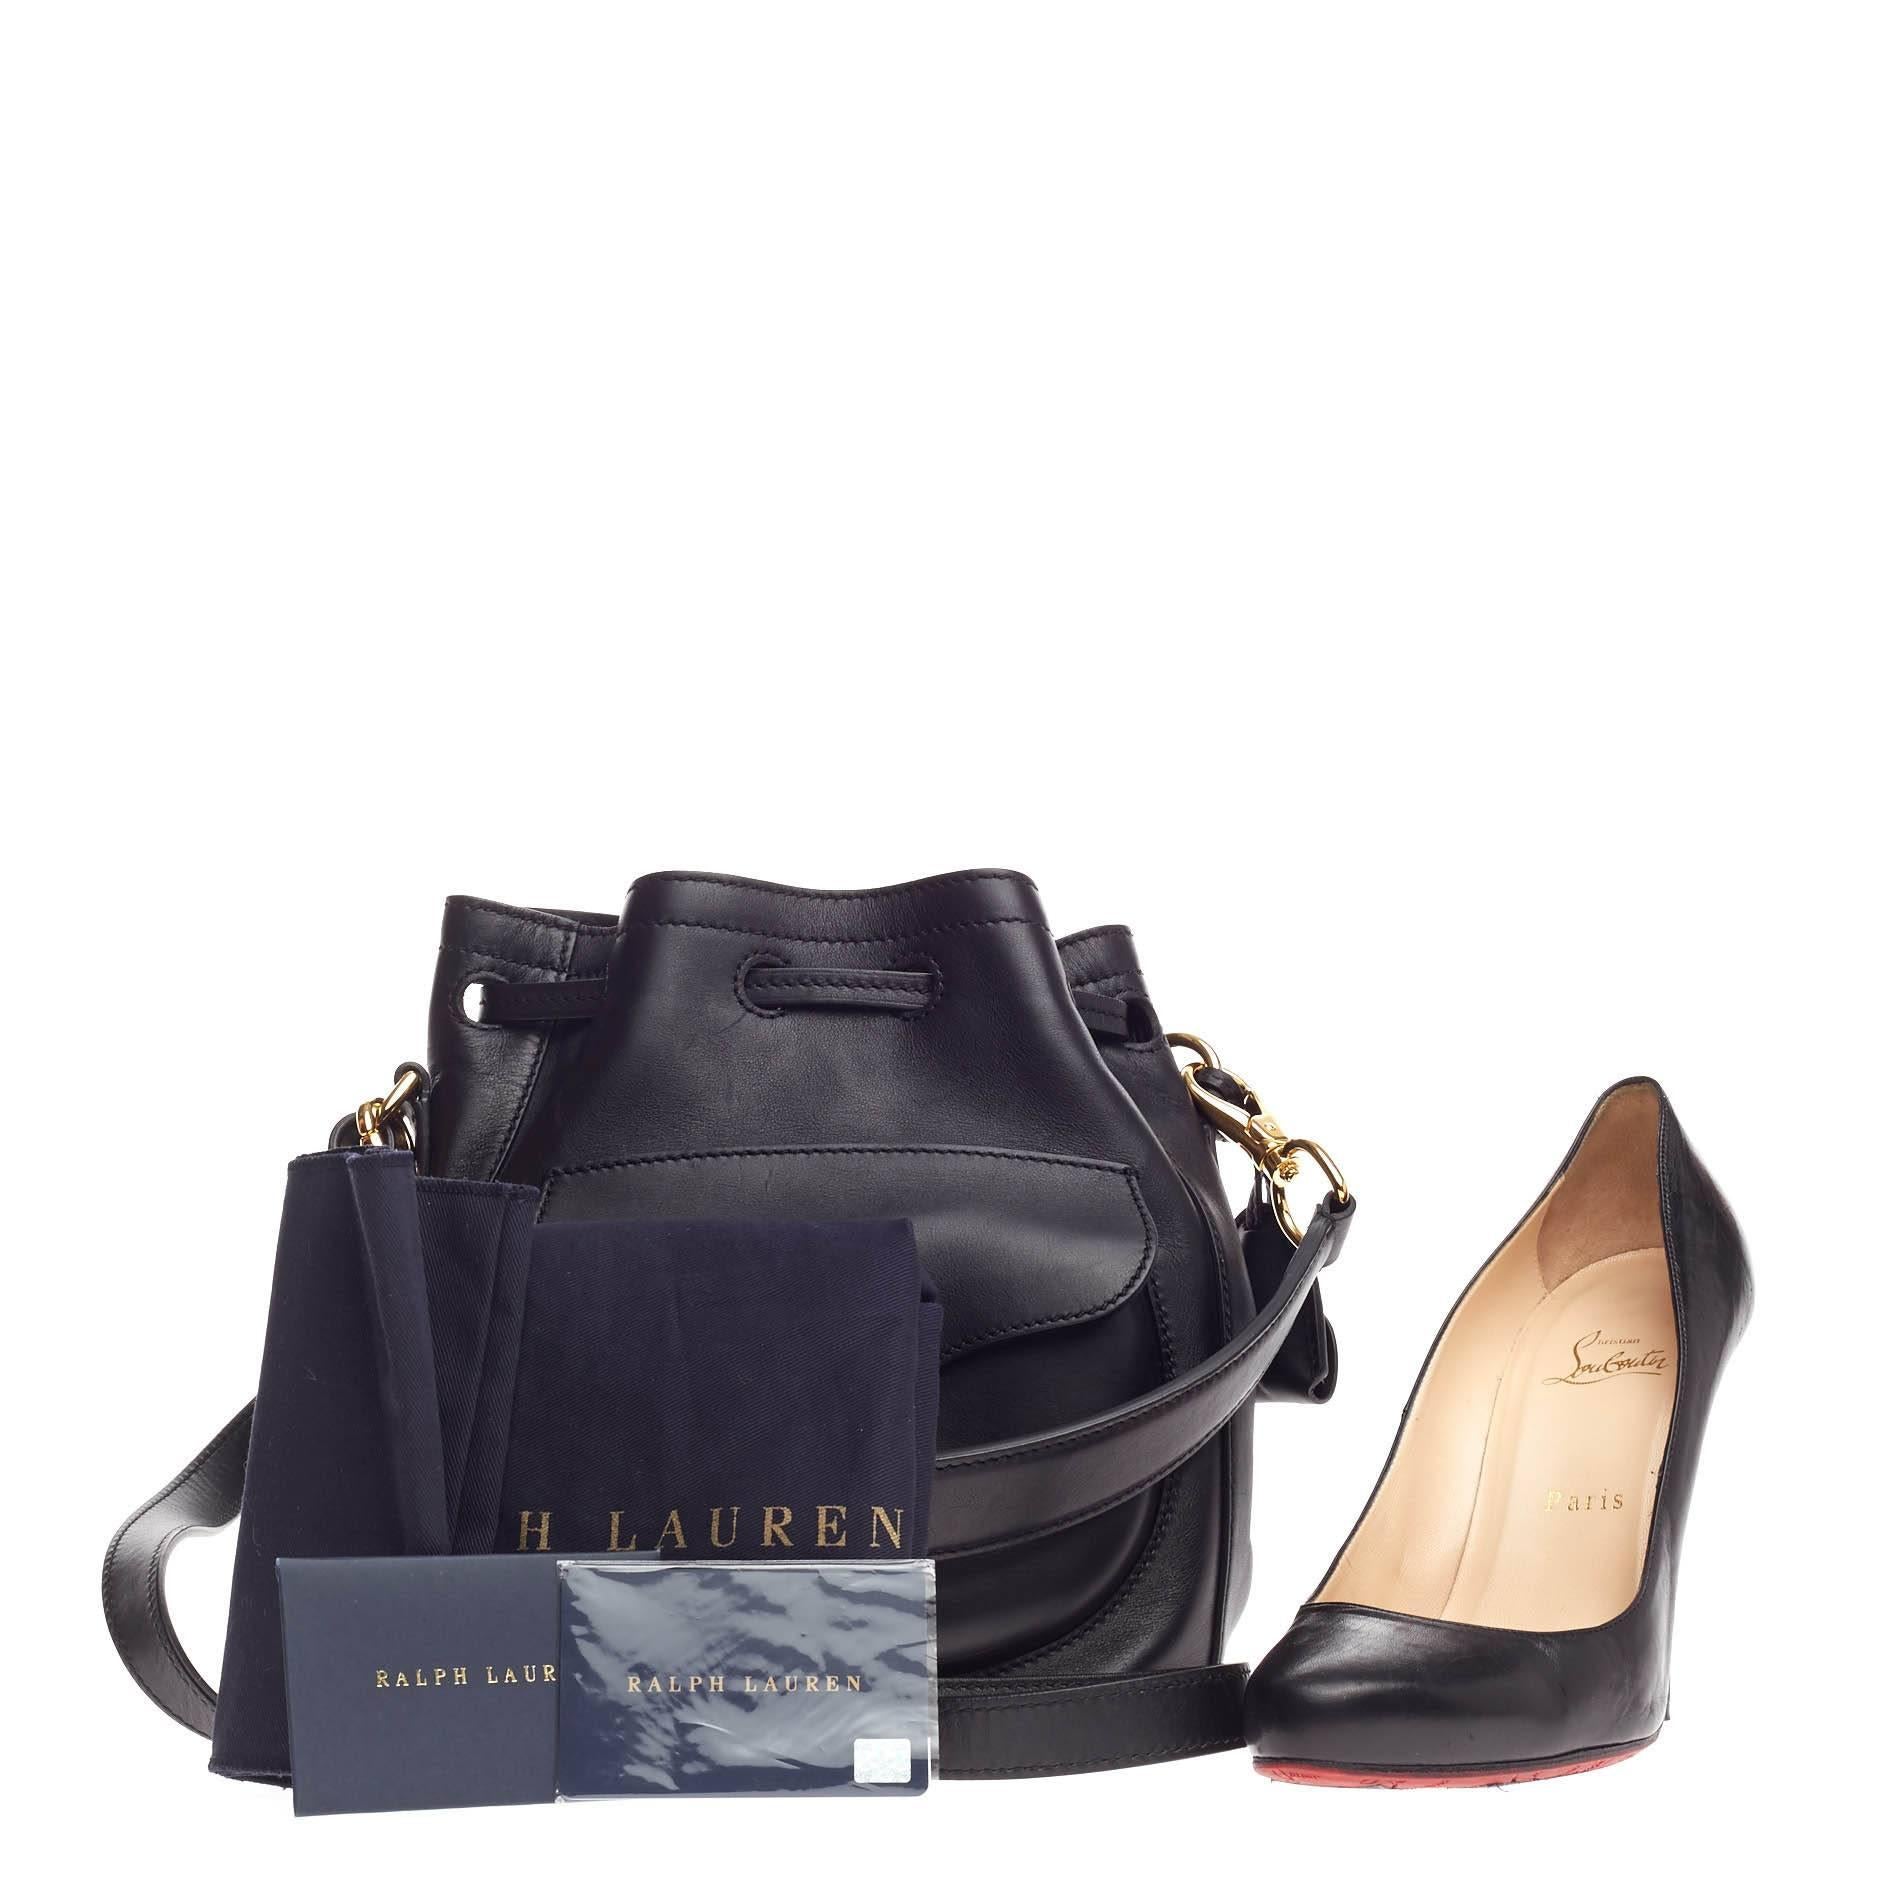 This authentic Ralph Lauren Collection Ricky Drawstring Bag Leather Small is a reinvention of the brand’s most loved Ricky collection. Crafted from black leather, this petite, stylish bucket bag features an exterior front flap pocket with signature